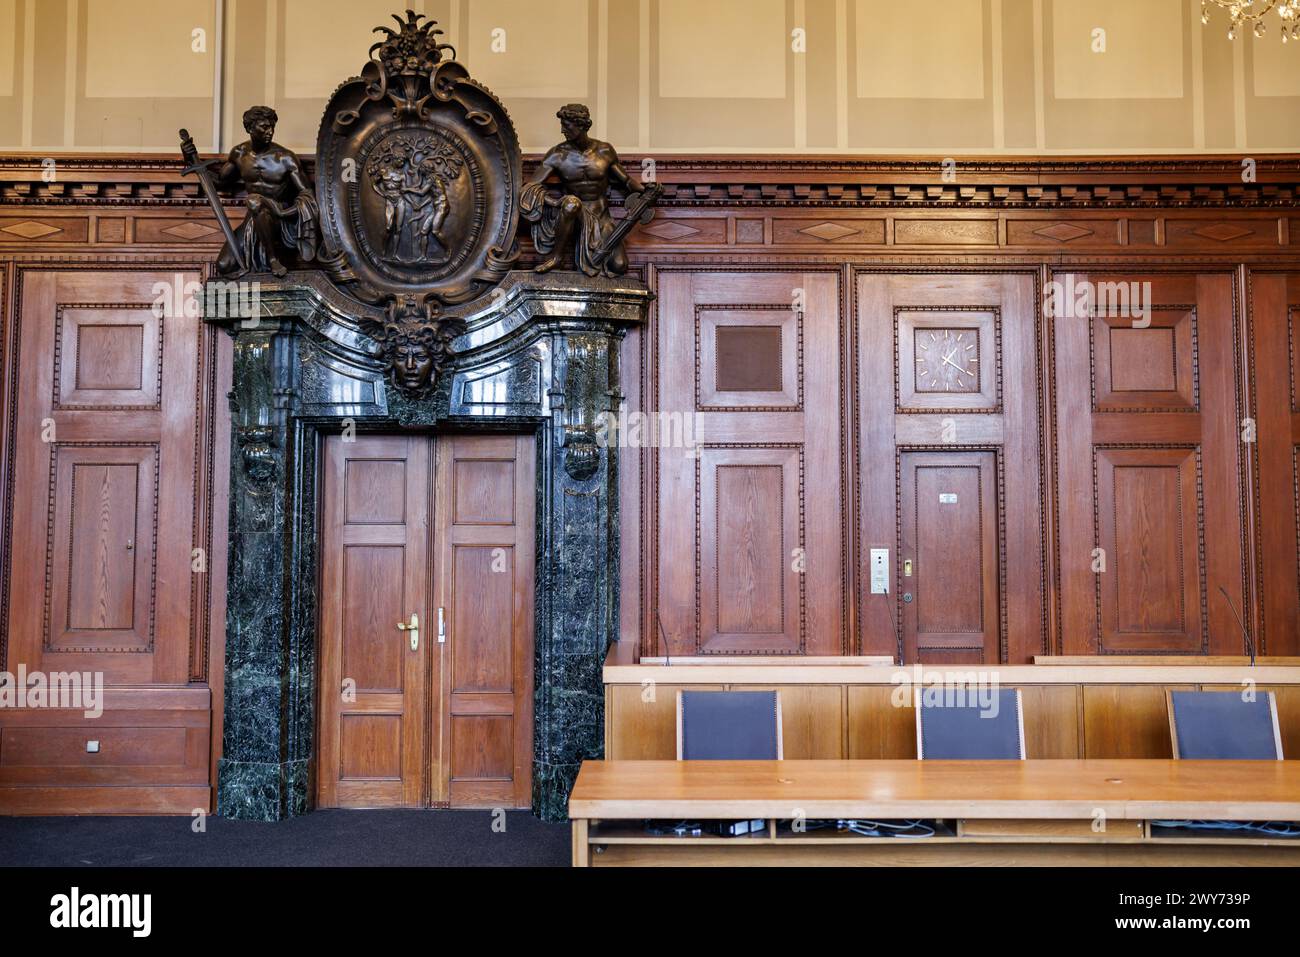 Nuremberg, Germany. 04th Apr, 2024. View of the entrance door (left) and the dock (back right) in the historic jury courtroom 600 in the 'Memorium Nuremberg Trials' in the Nuremberg Justice Building. The 'Main War Crimes Trial' of the International Military Tribunal against leading representatives of the National Socialist regime took place in Hall 600 of the Nuremberg Justice Building from November 20, 1945 to October 1, 1946. Credit: Daniel Karmann/dpa/Alamy Live News Stock Photo